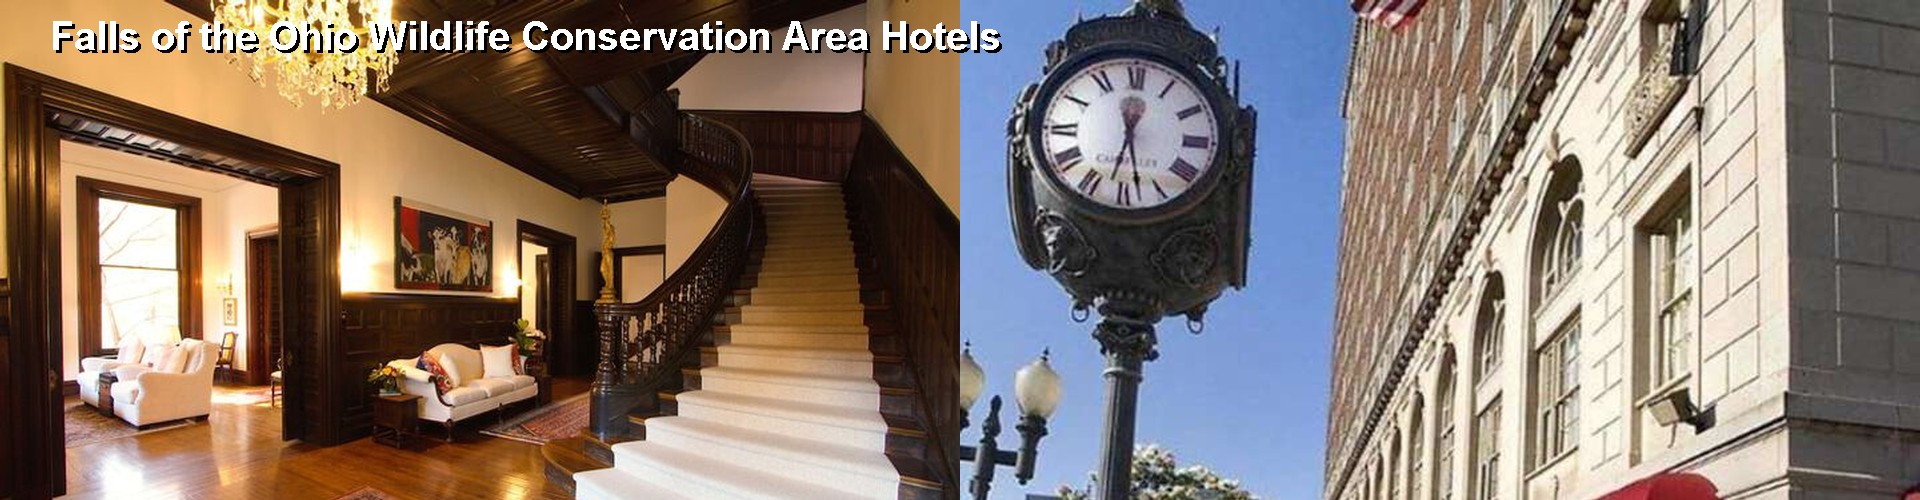 5 Best Hotels near Falls of the Ohio Wildlife Conservation Area